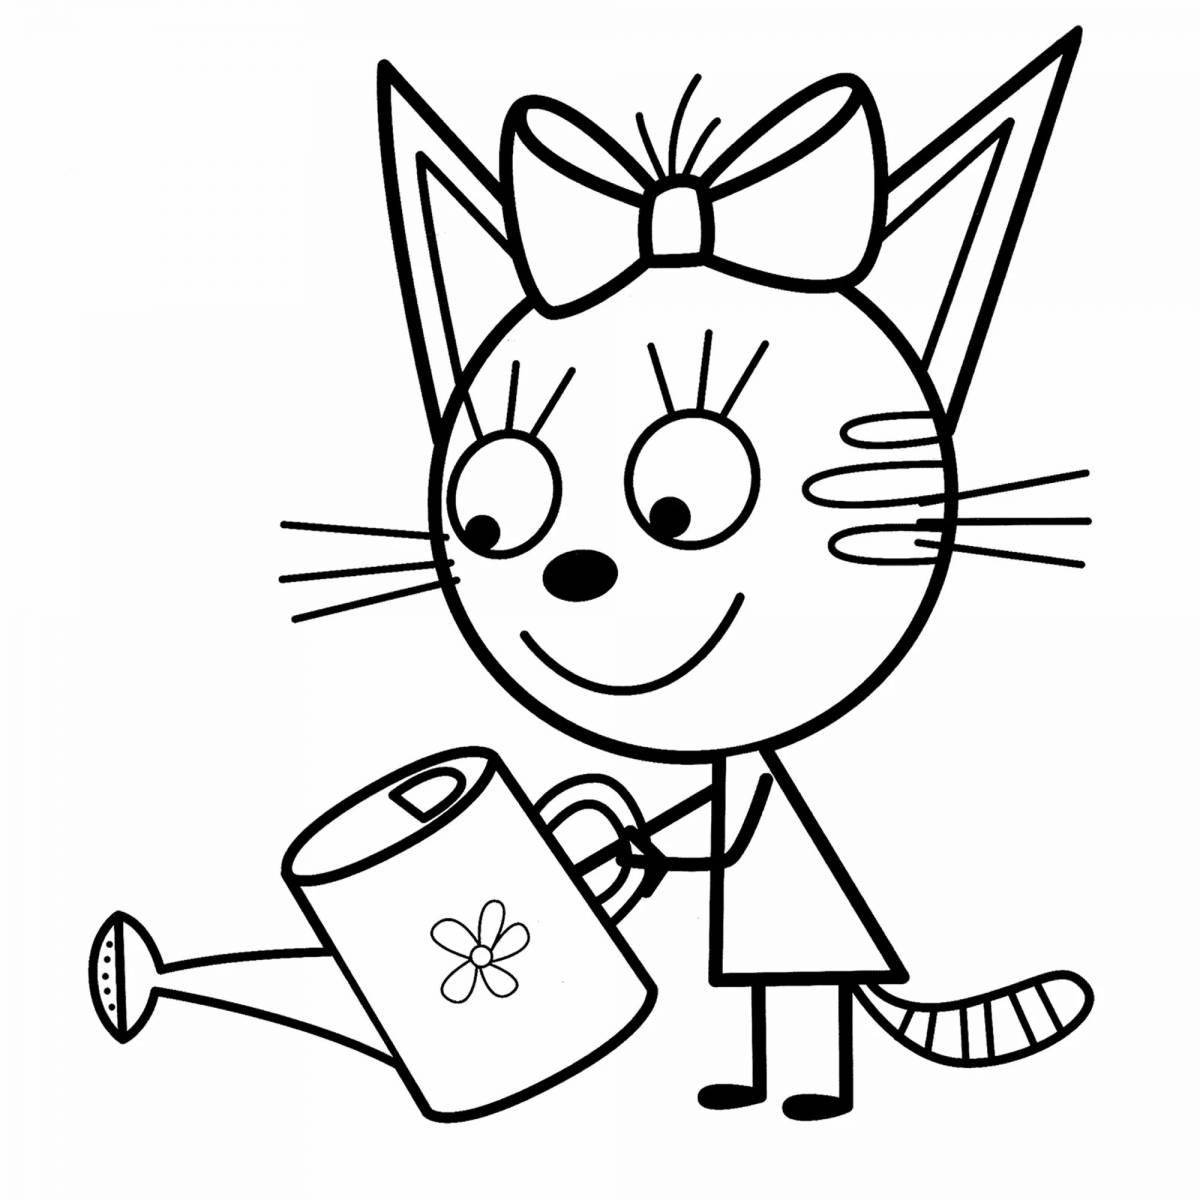 Drawing 3 cats coloring pages for girls